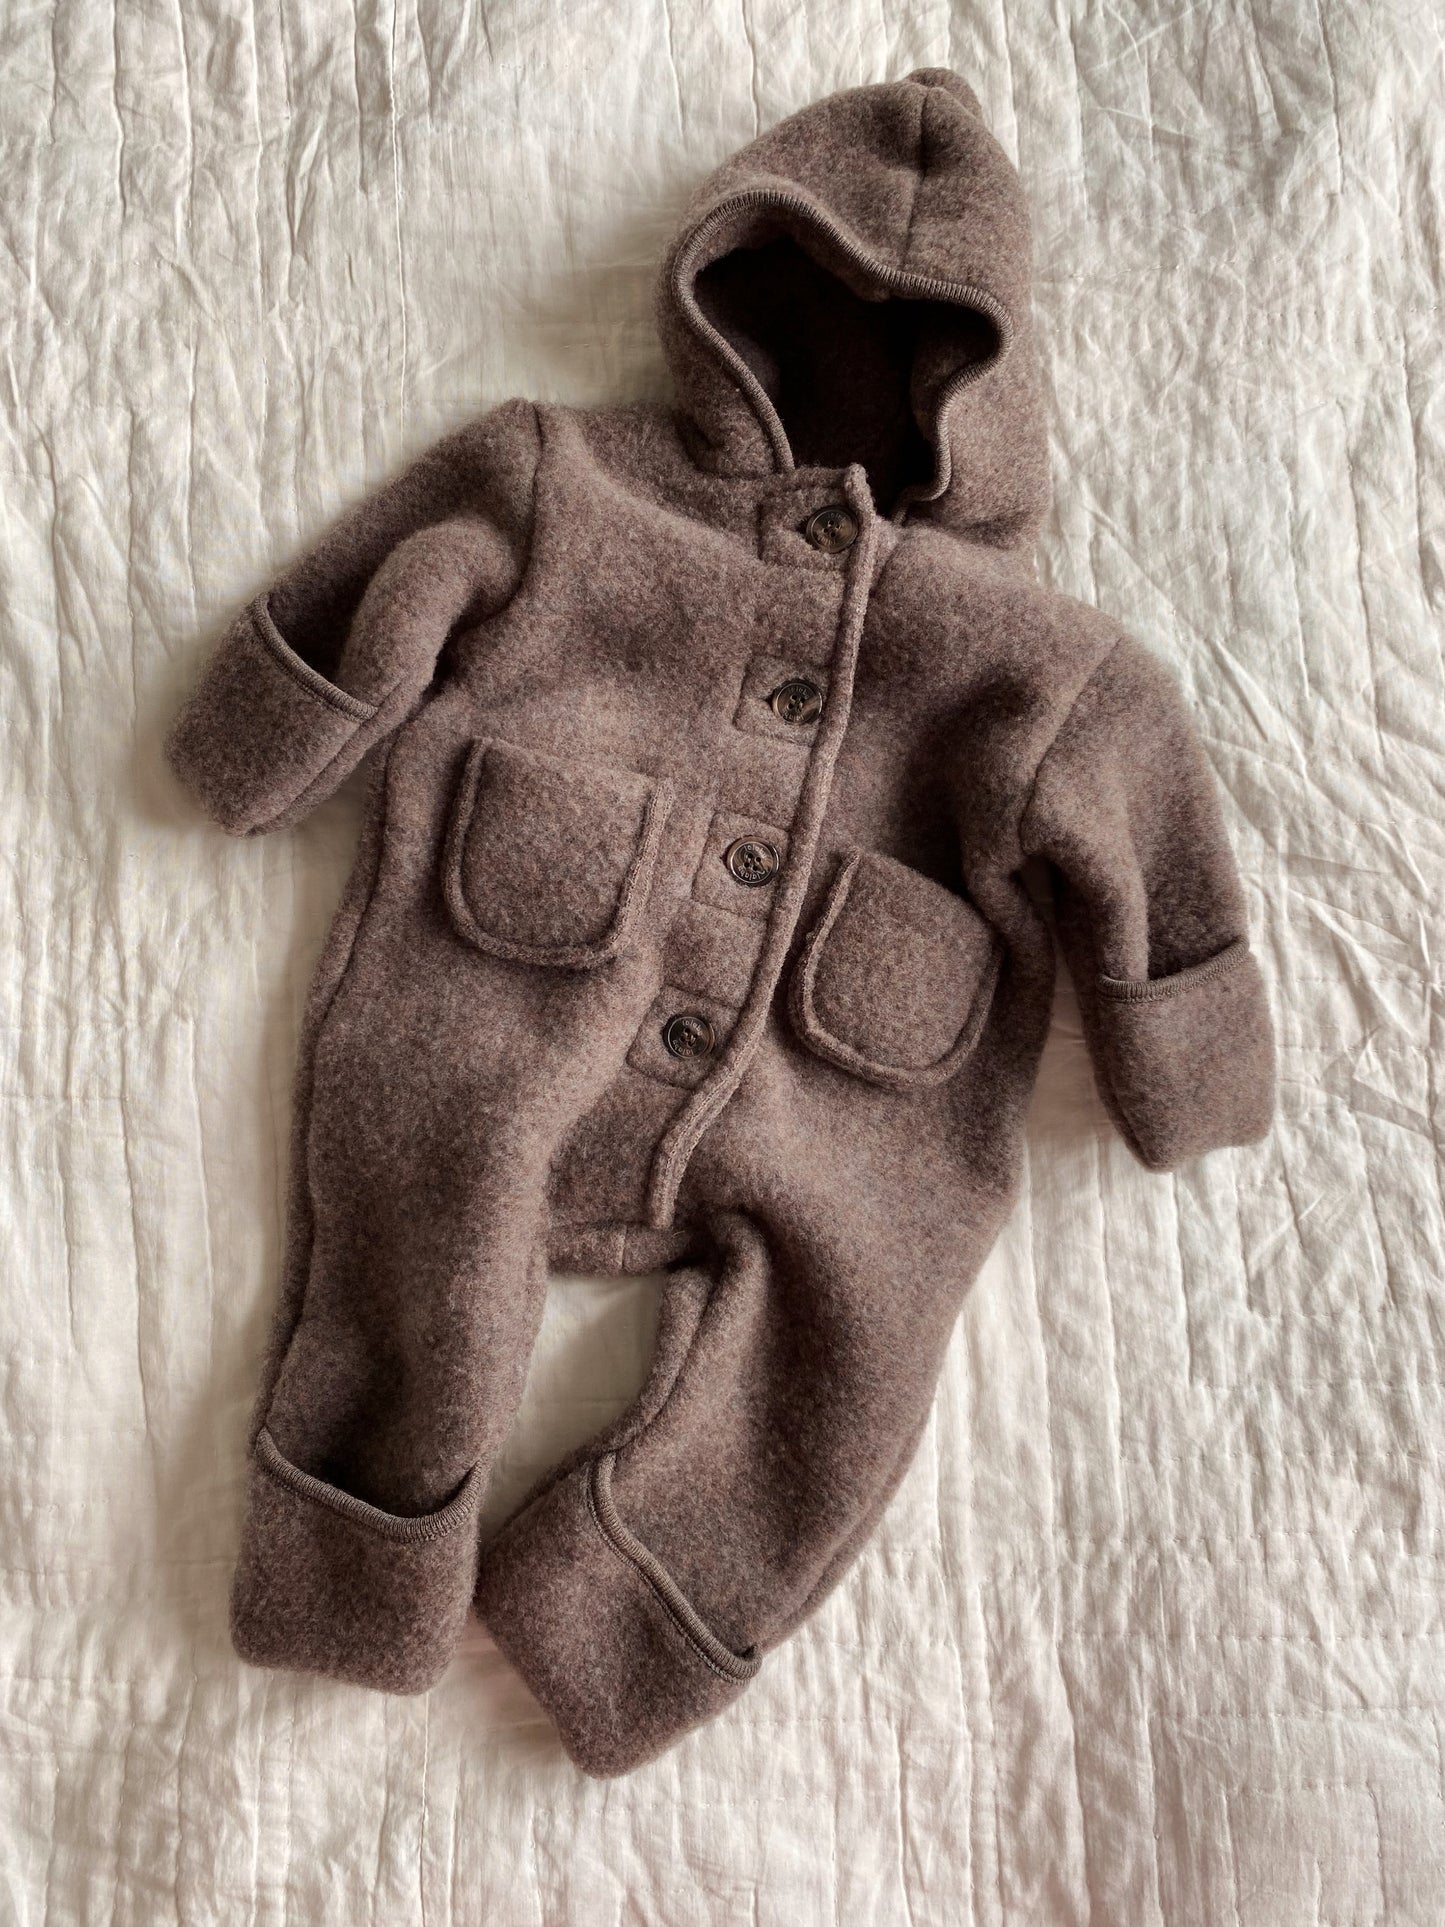 Lalaby - Teddy Onesie - Chocolate